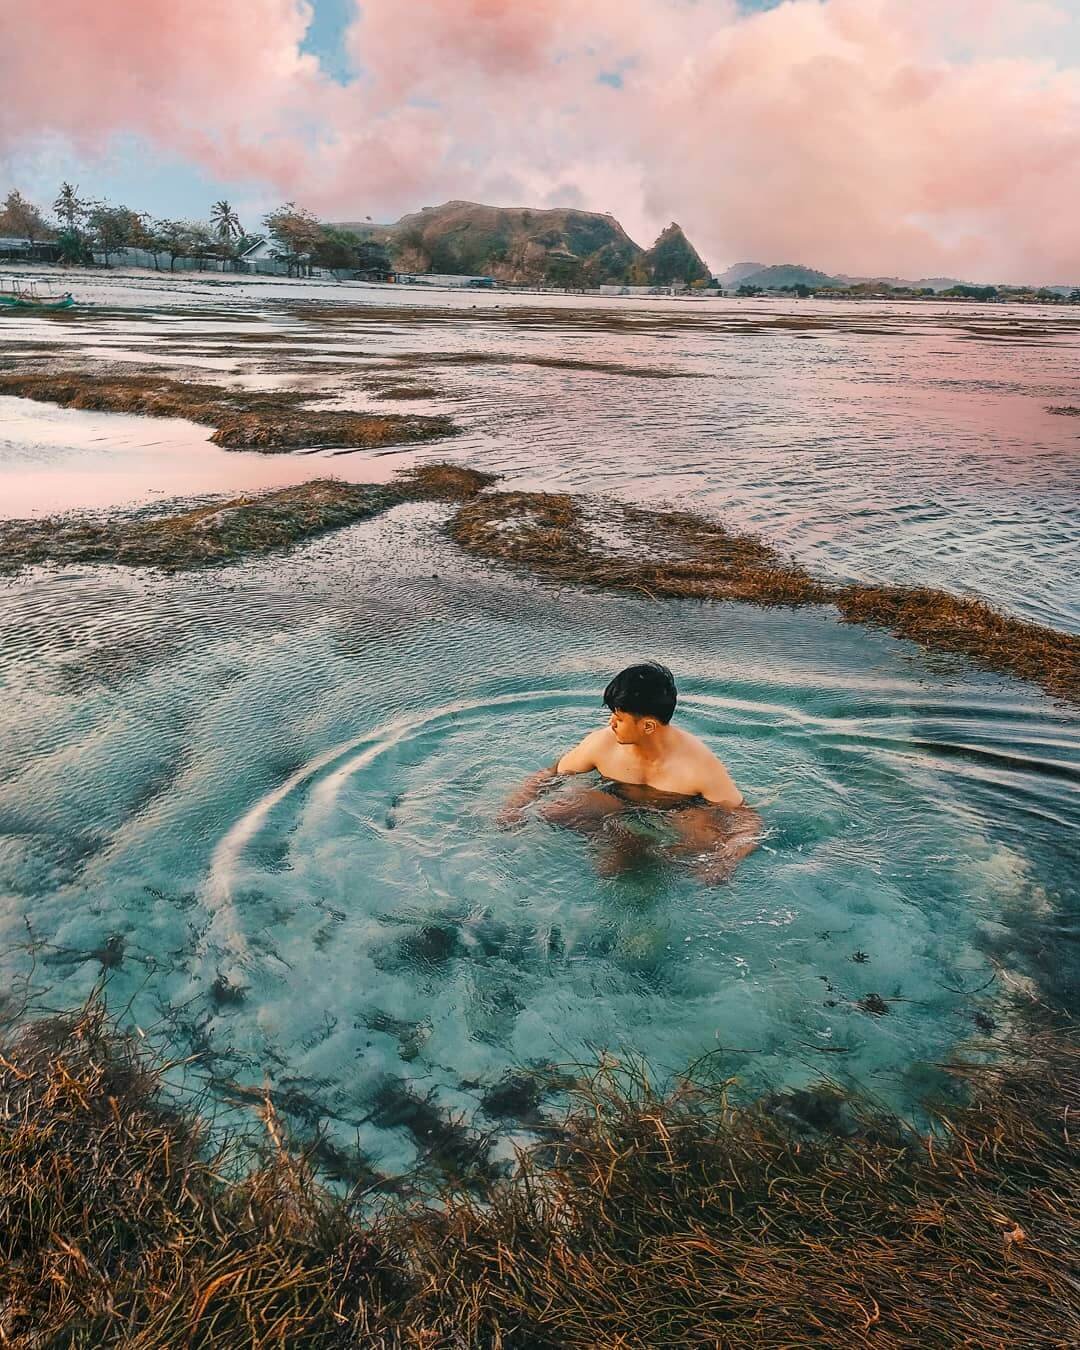 "Just me and a rockpool..." Soulful Tanjung An Beach, Lombok